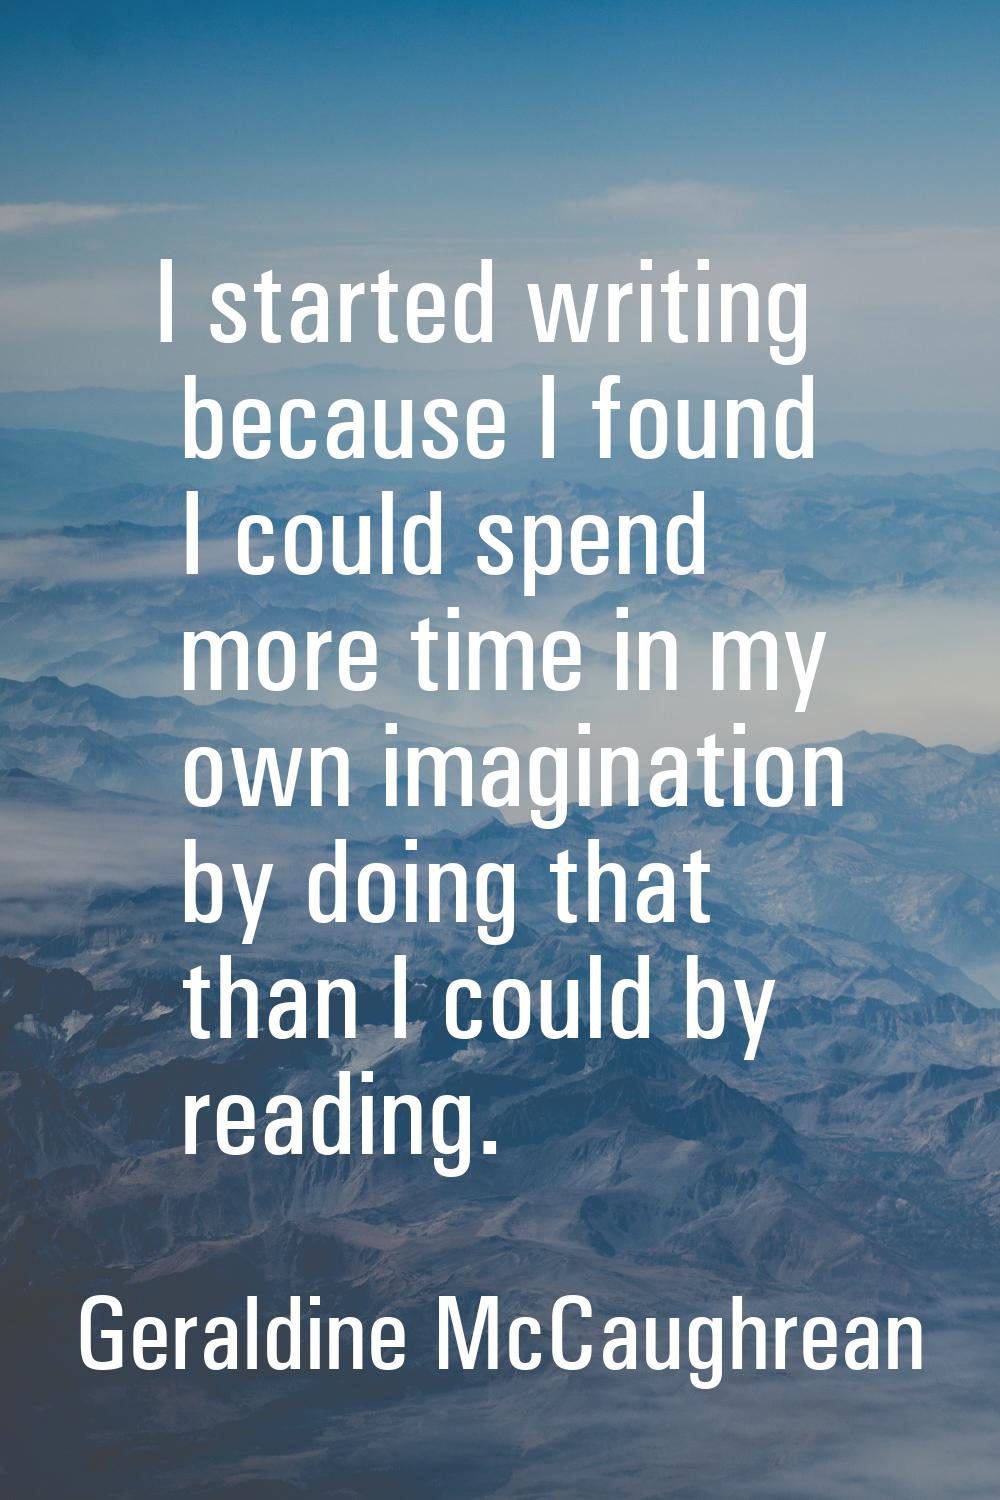 I started writing because I found I could spend more time in my own imagination by doing that than 